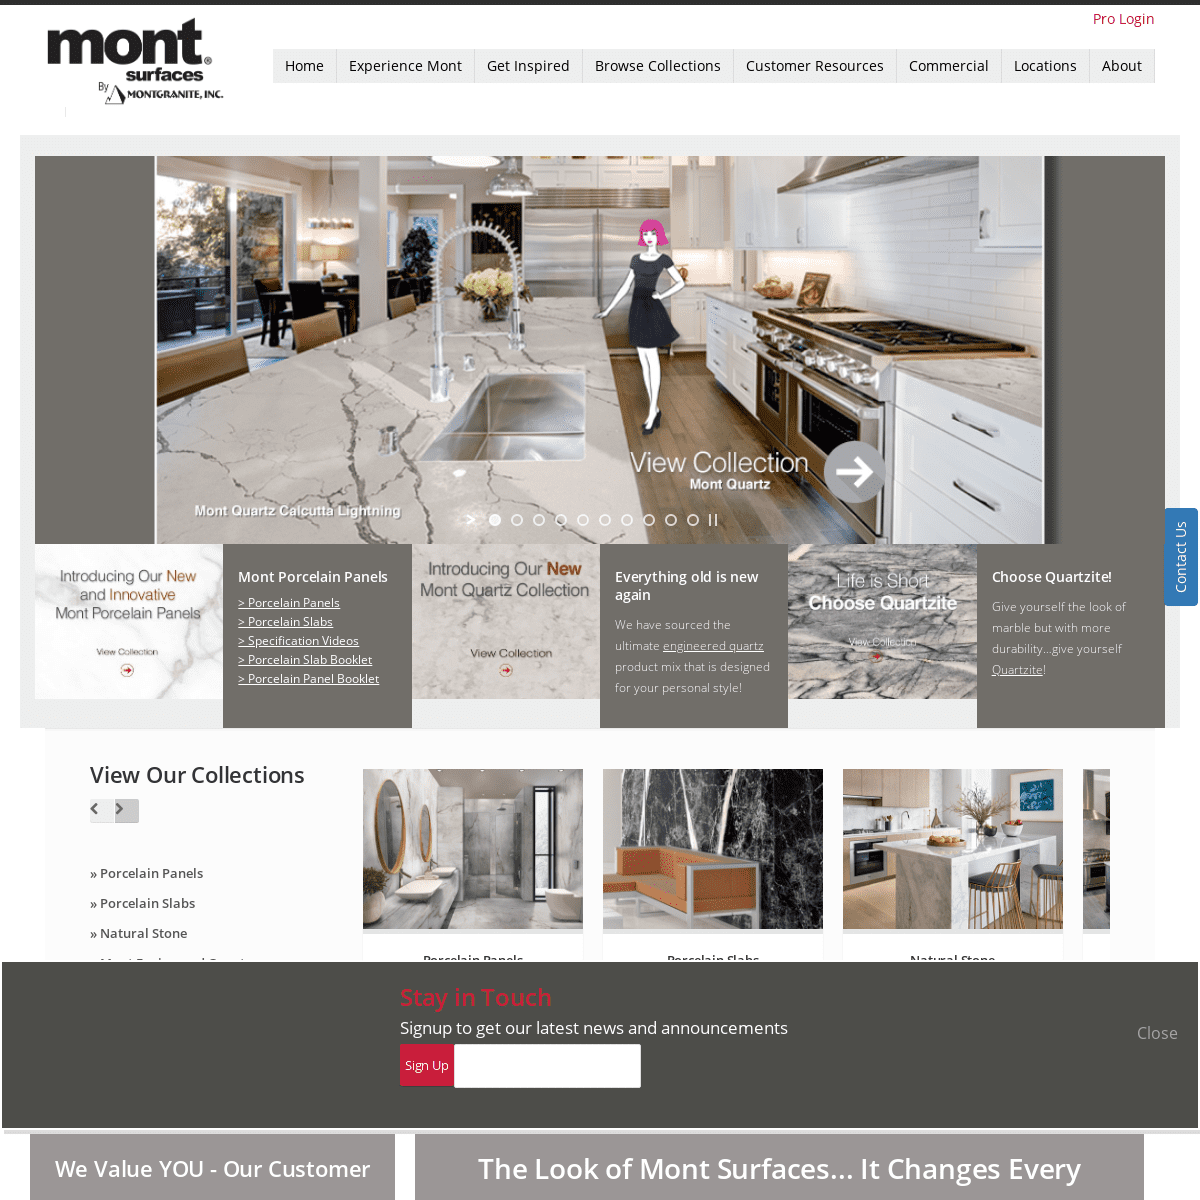 A complete backup of montsurfaces.com